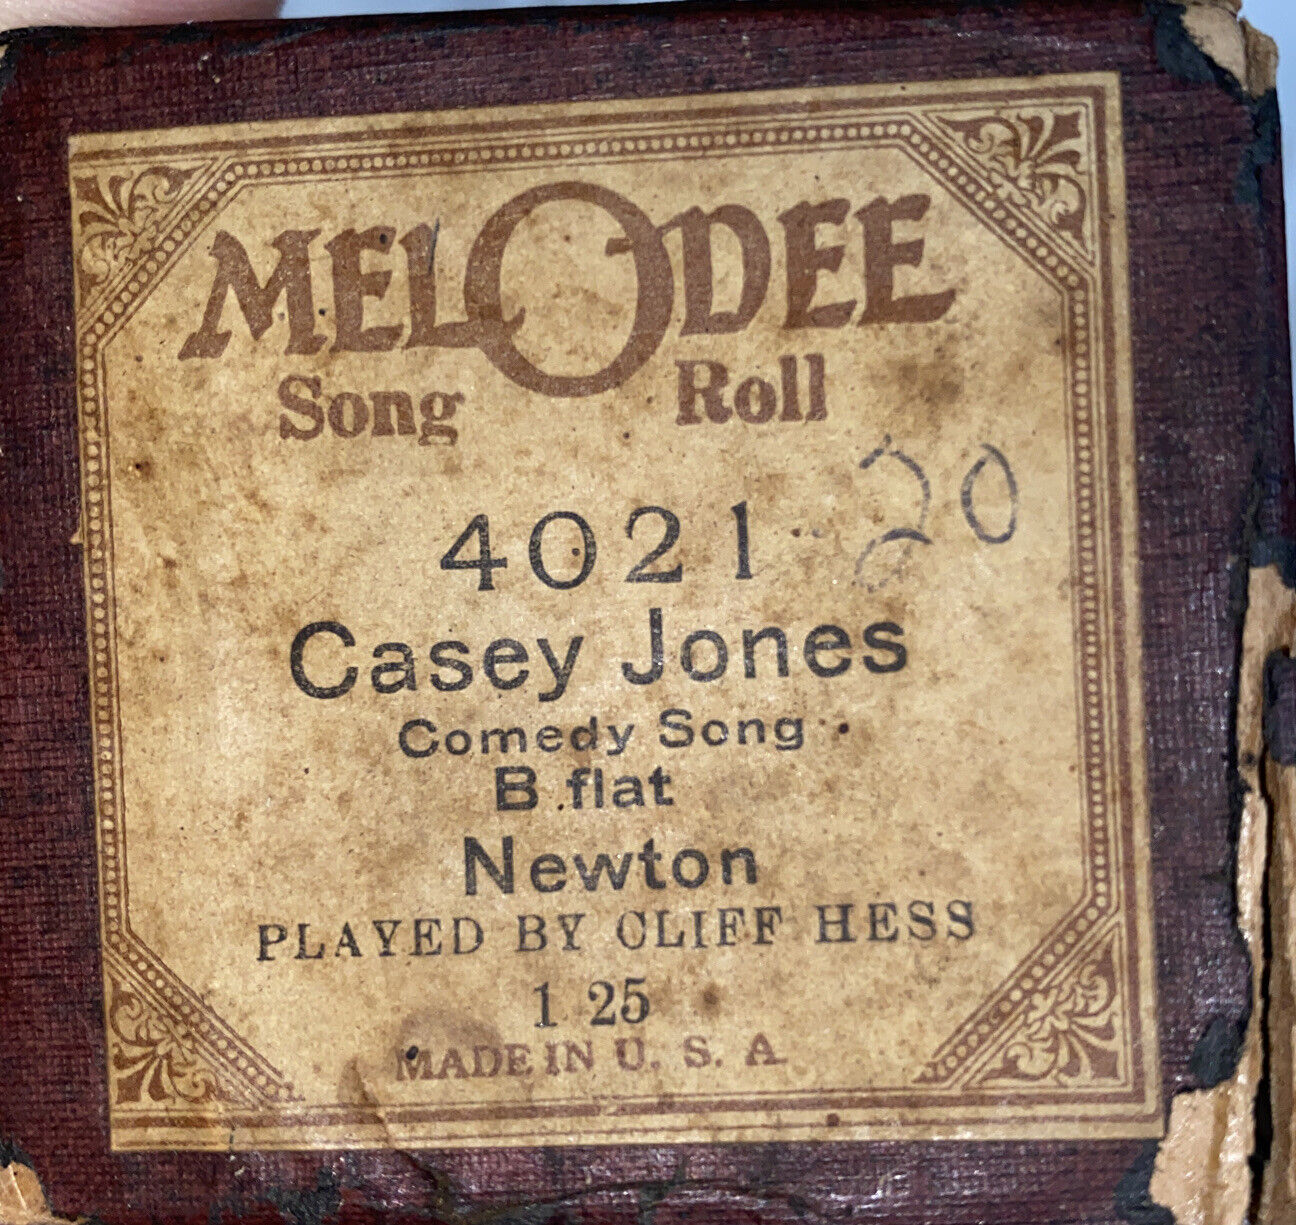 Melodee Music Roll 4021 - CASEY JONES  Cliff Hess -Player Piano Roll